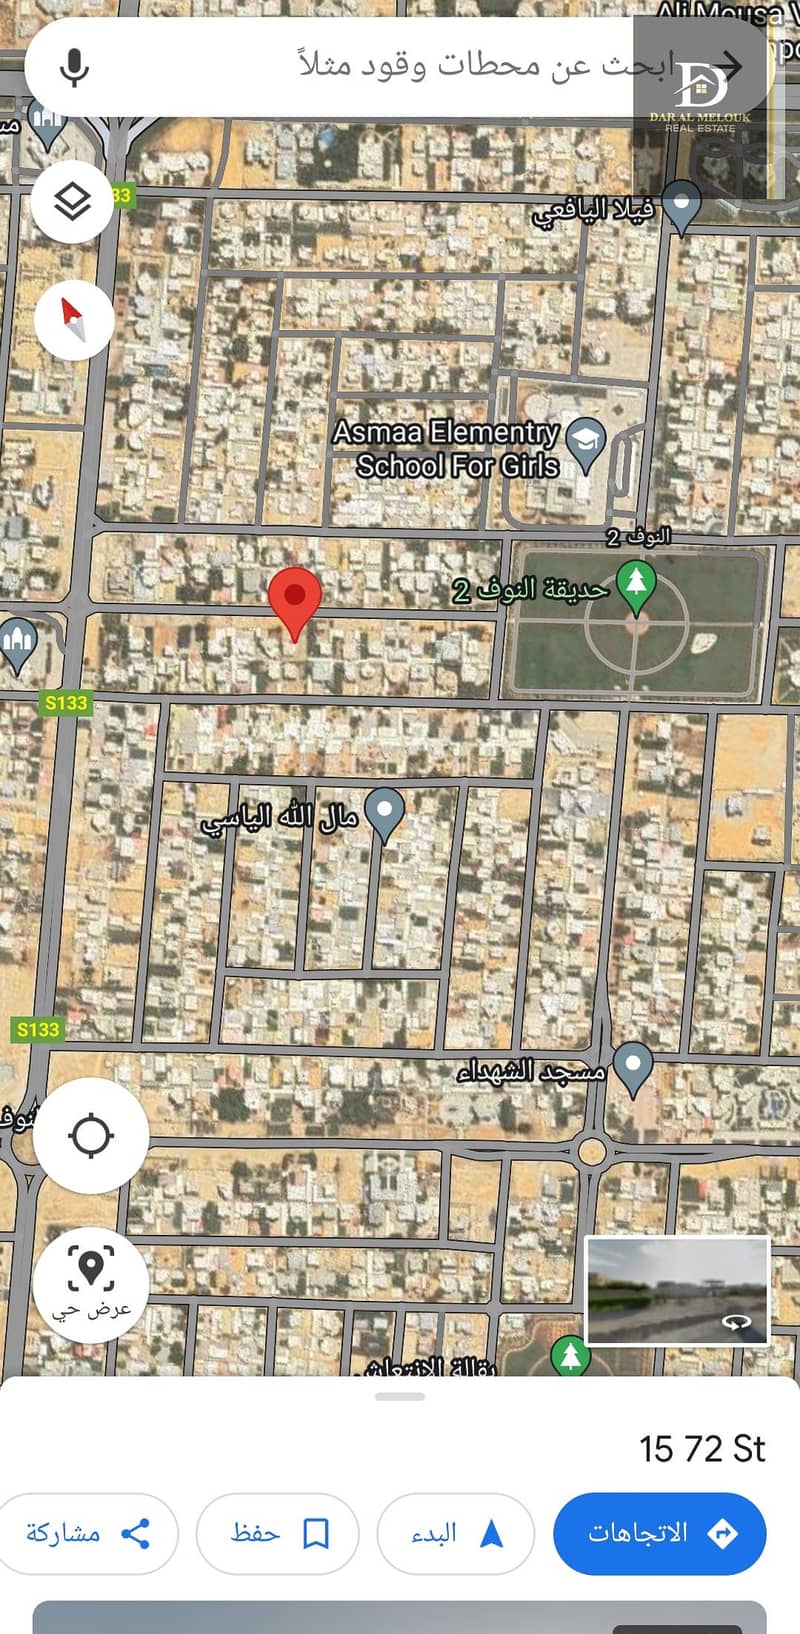 For sale in Sharjah, Al Nouf area, residential land, area of ​​18,000 square feet, permit for a ground and first villa, permitting two attached villas, excellent location on Jar Street, close to the park and close to the mosque. Al Nouf area is characteri